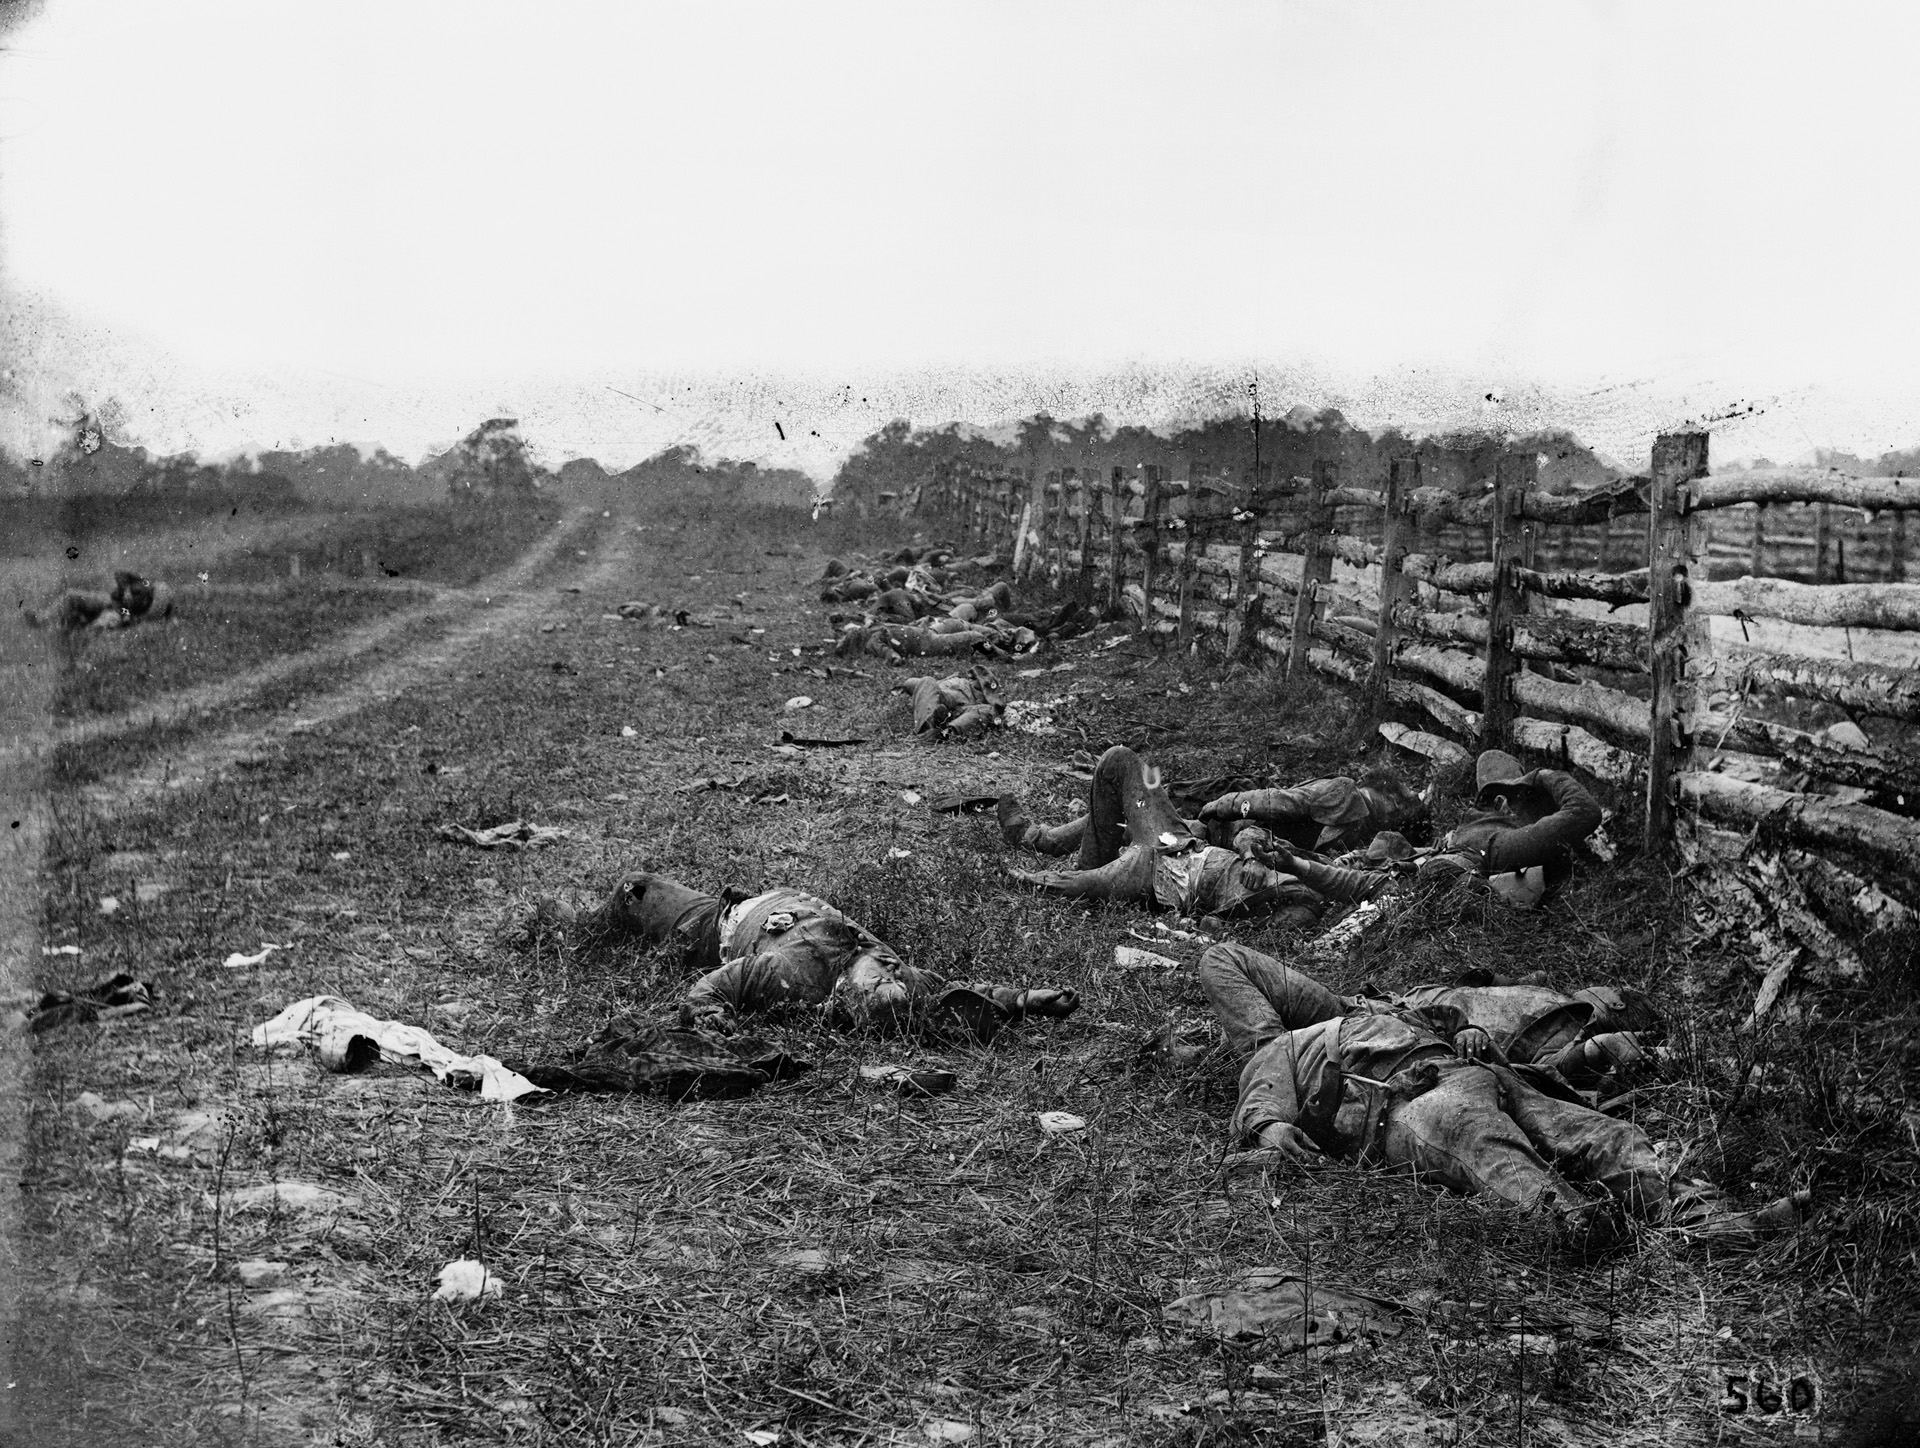 Dead Confederate soldiers from Louisiana lay fallen alongside Hagerstown Turnpike after the Battle of Antietam. This was one of the photos that shocked the nation when displayed in Brady’s New York City studio.